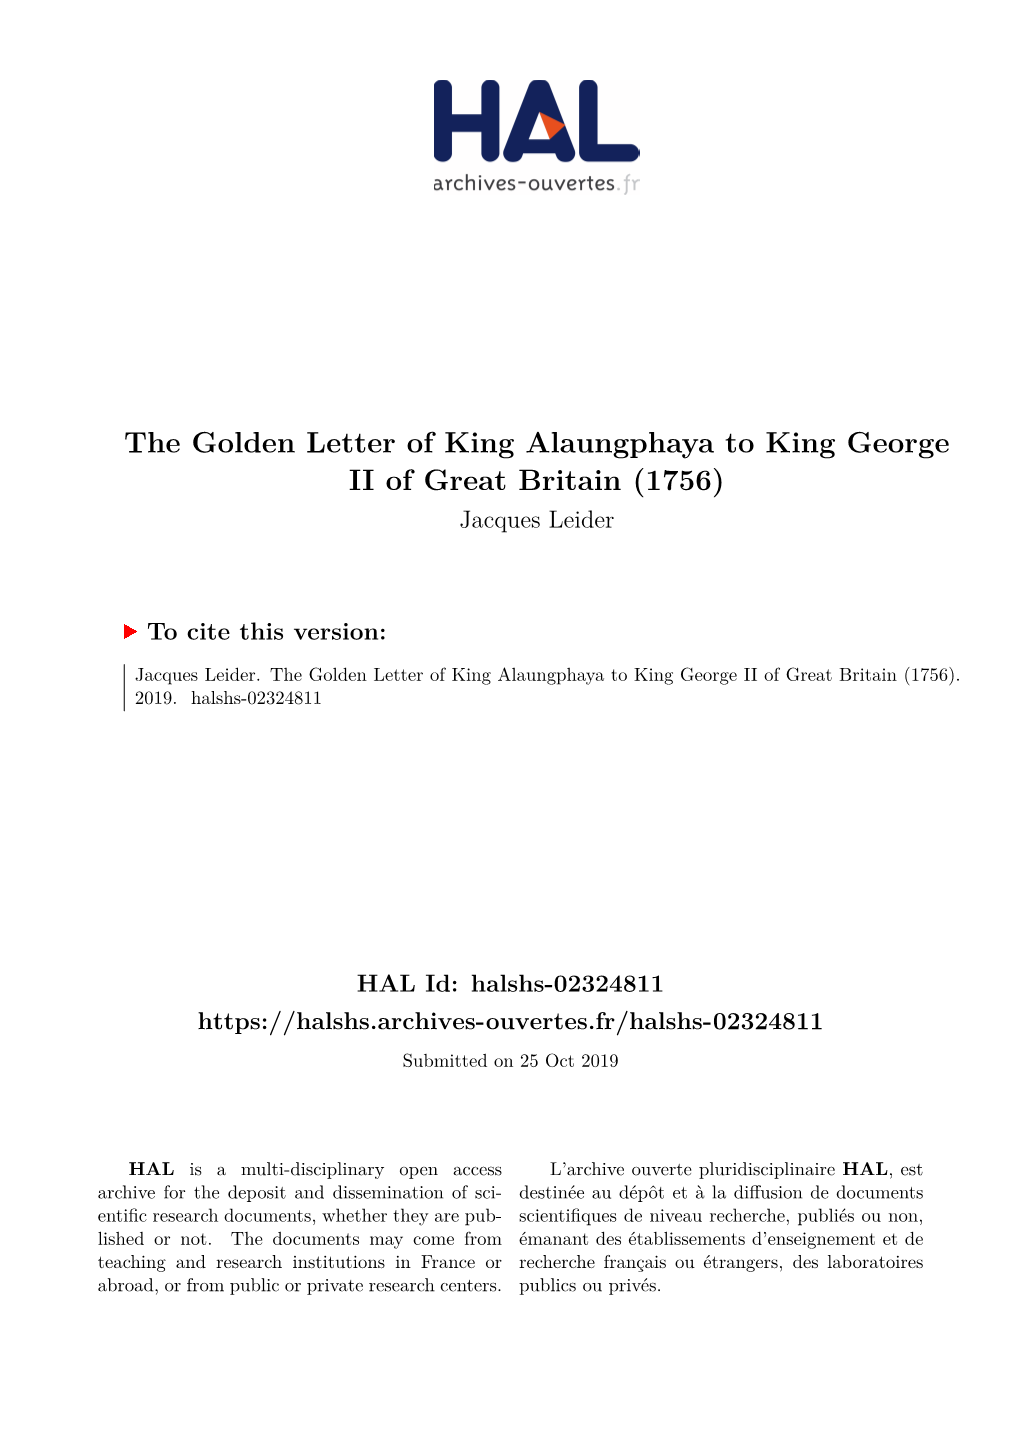 The Golden Letter of King Alaungphaya to King George II of Great Britain (1756) Jacques Leider